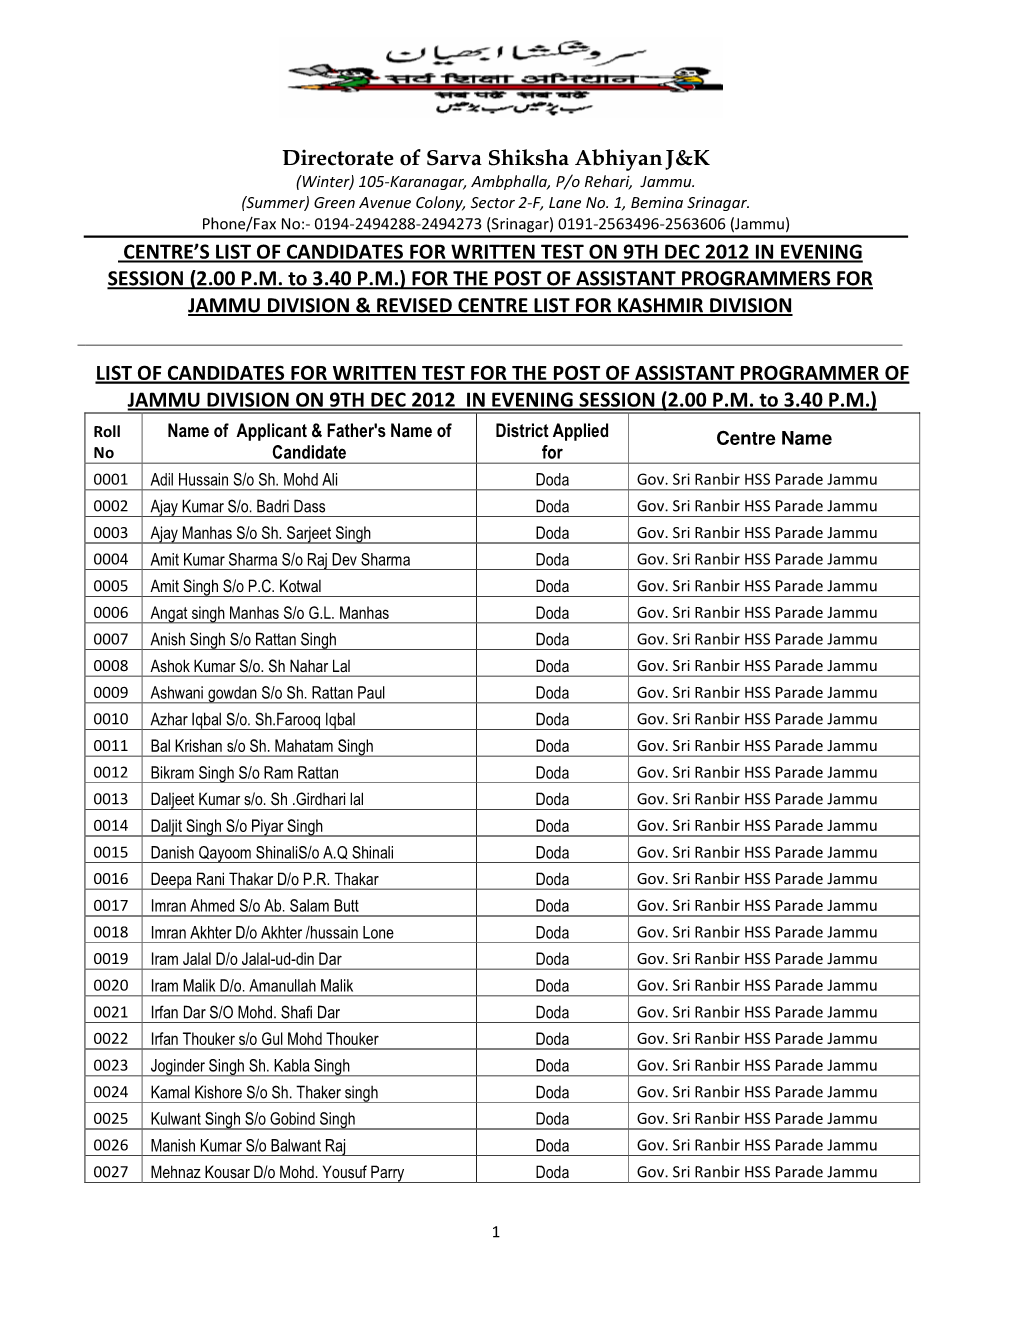 Directorate of Sarva Shiksha Abhiyanj&K CENTRE's LIST of CANDIDATES for WRITTEN TEST on 9TH DEC 2012 in EVENING SESSION